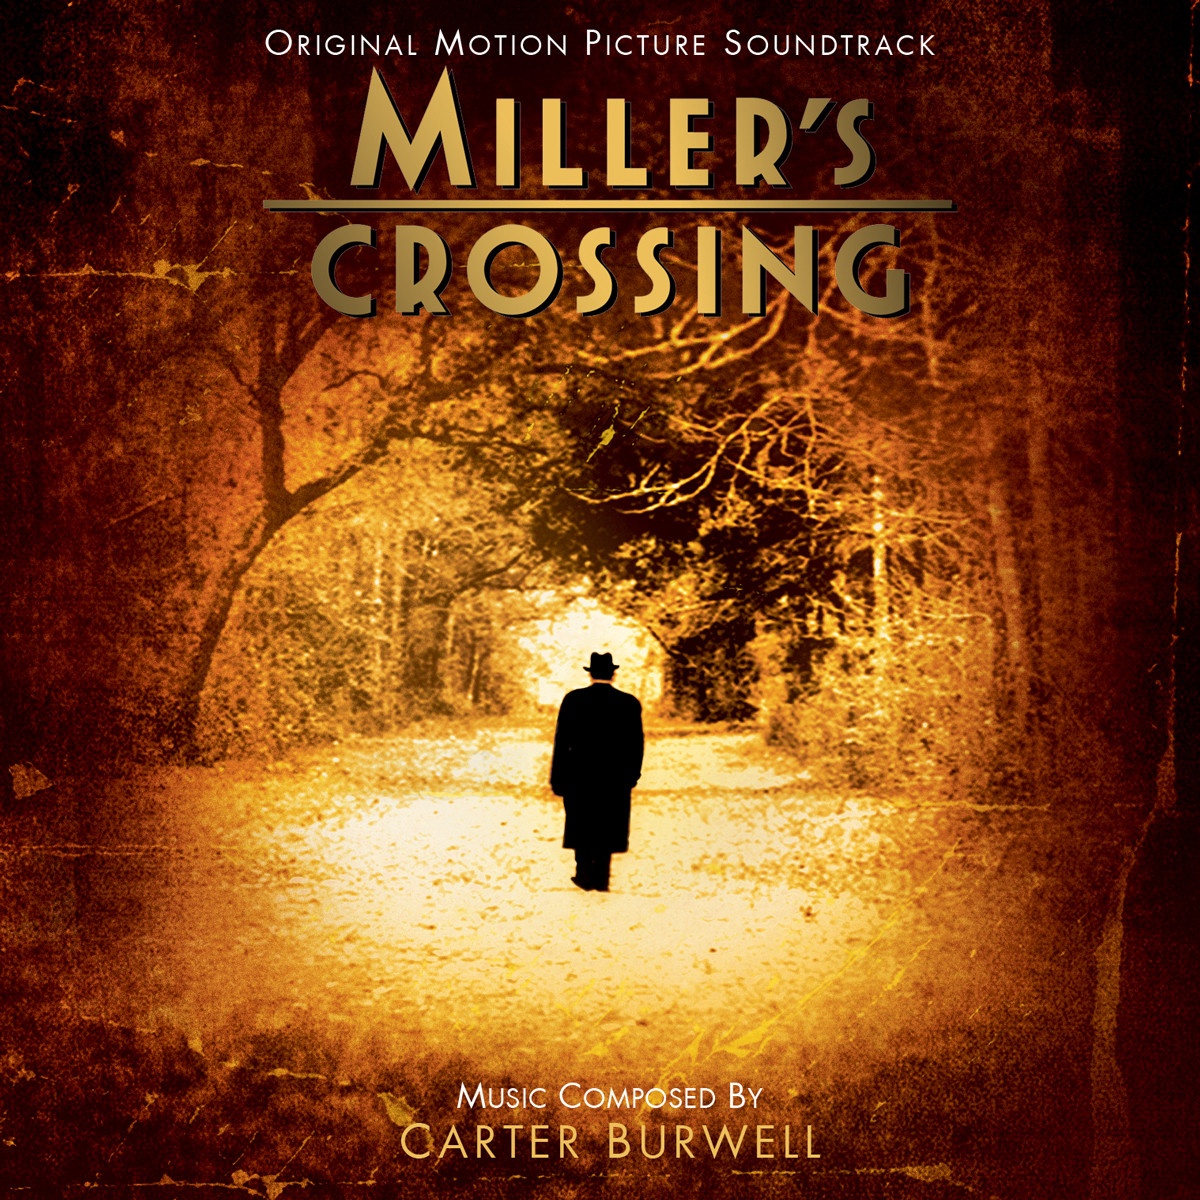 After Miller's Crossing